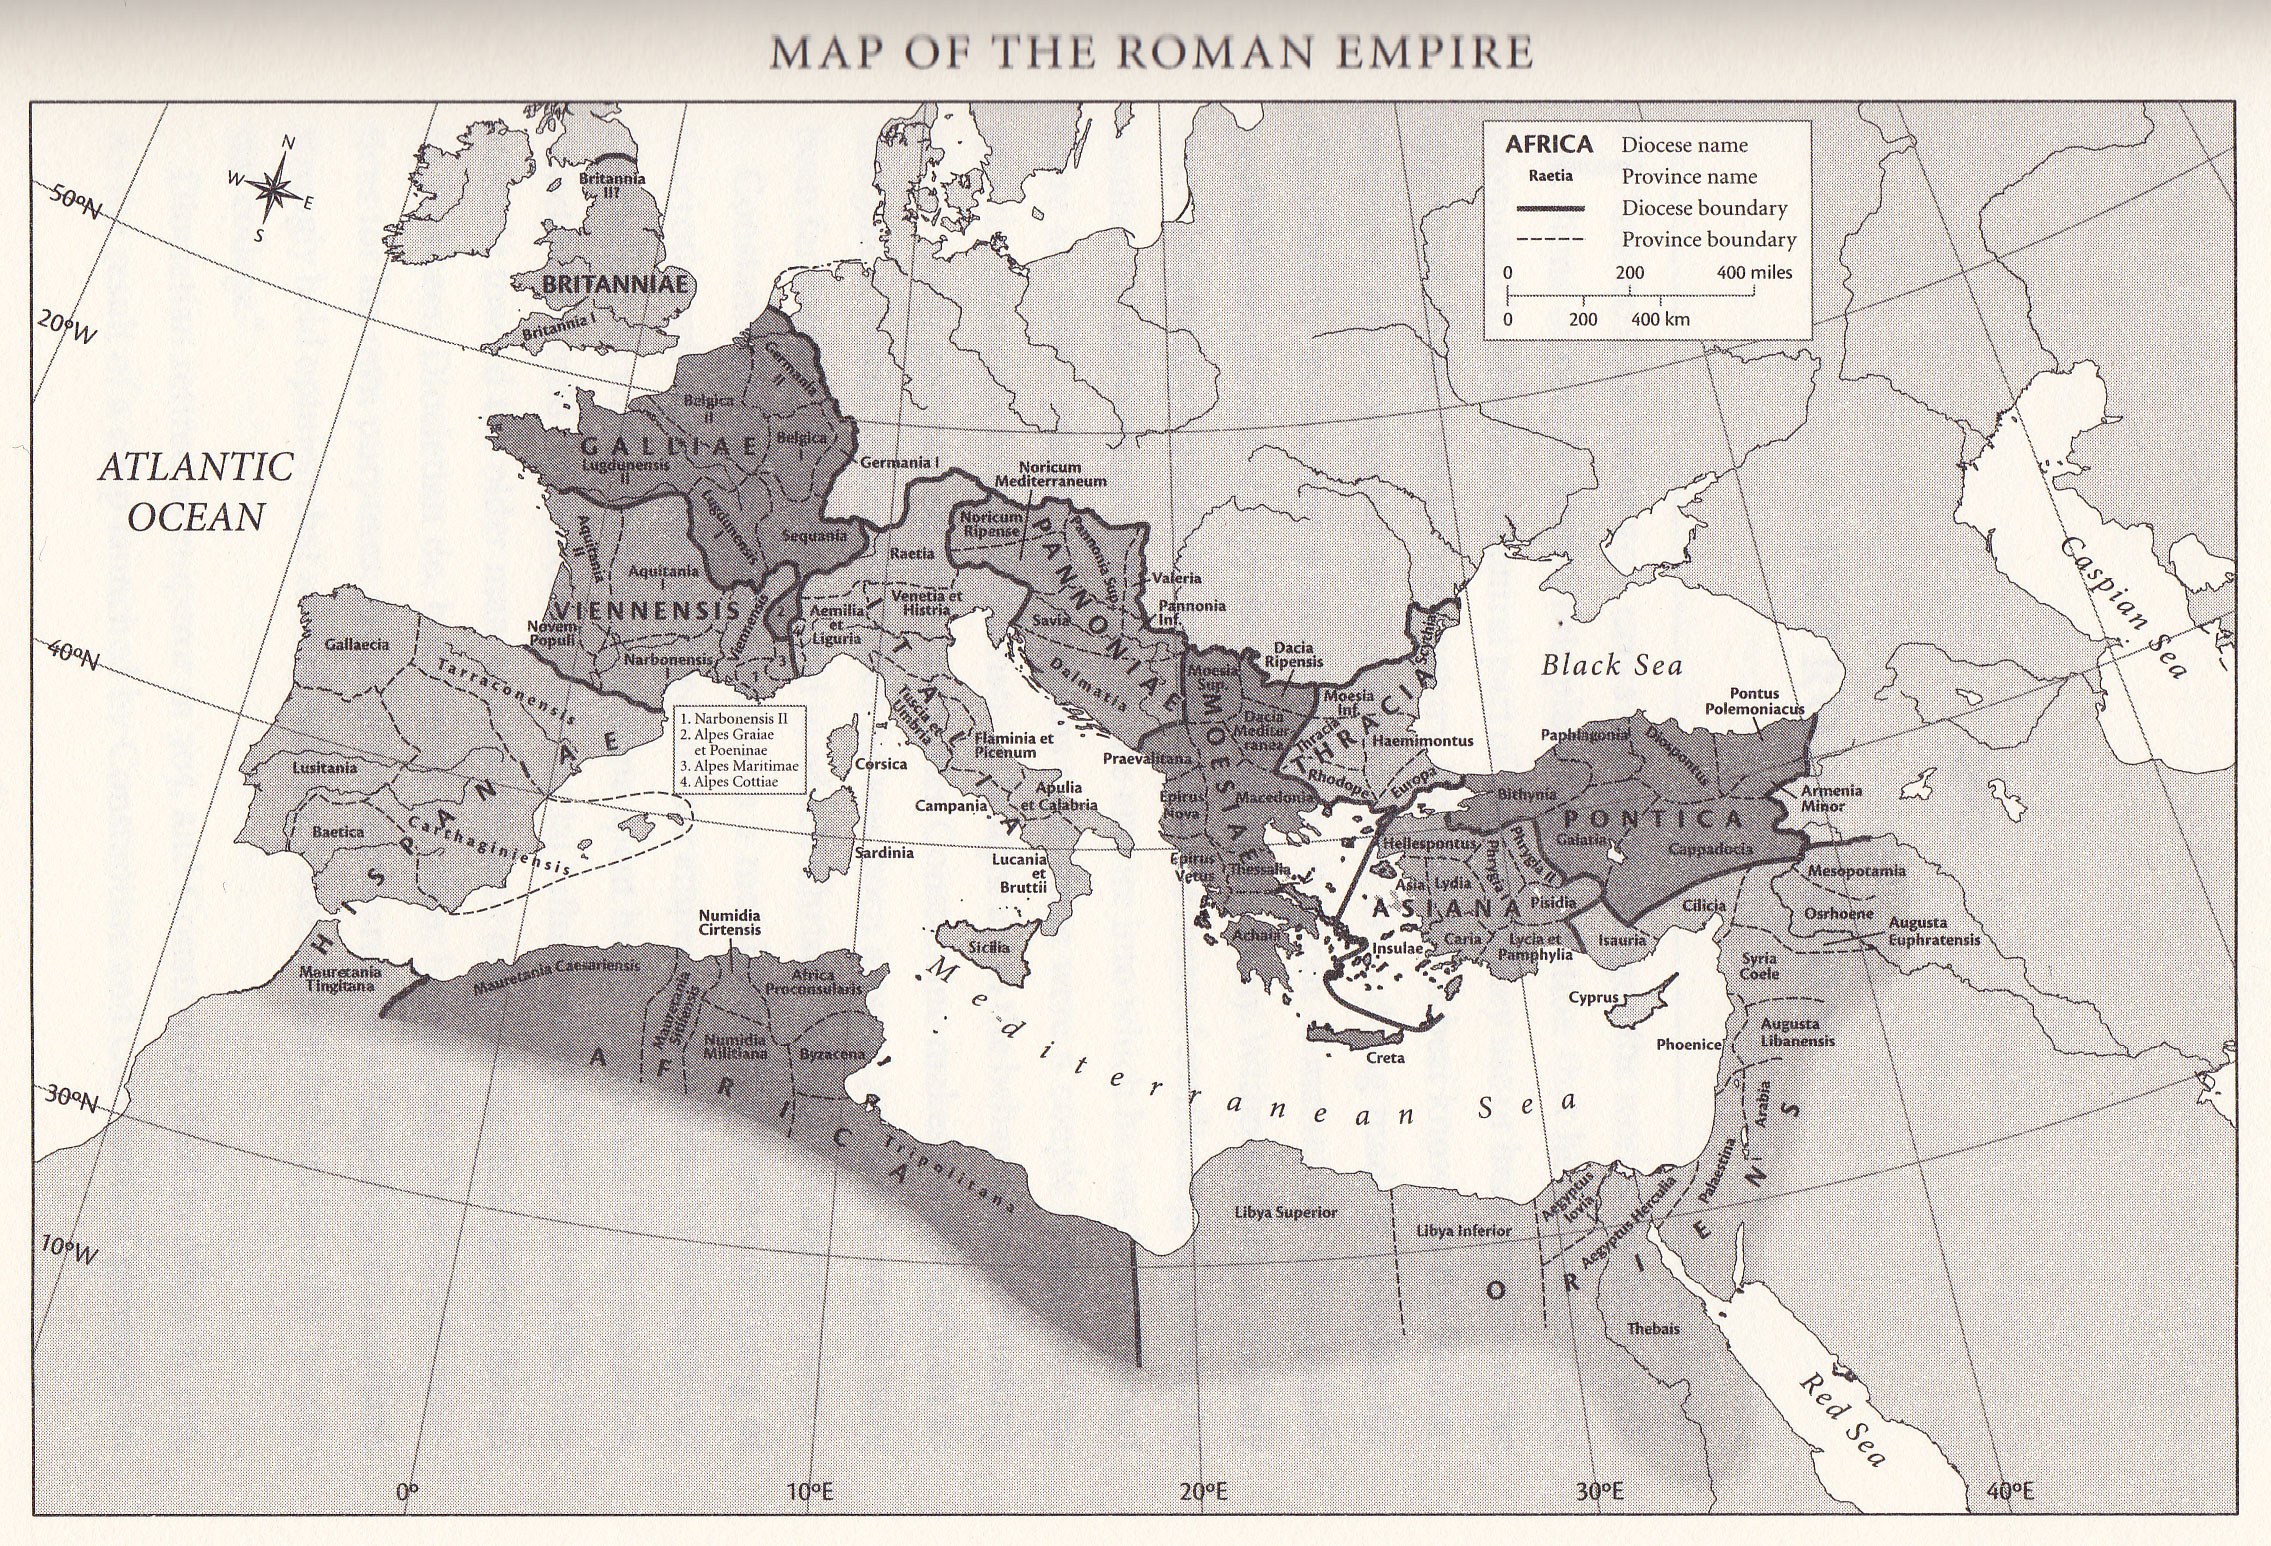 the first roman emperor to adopt christianity was